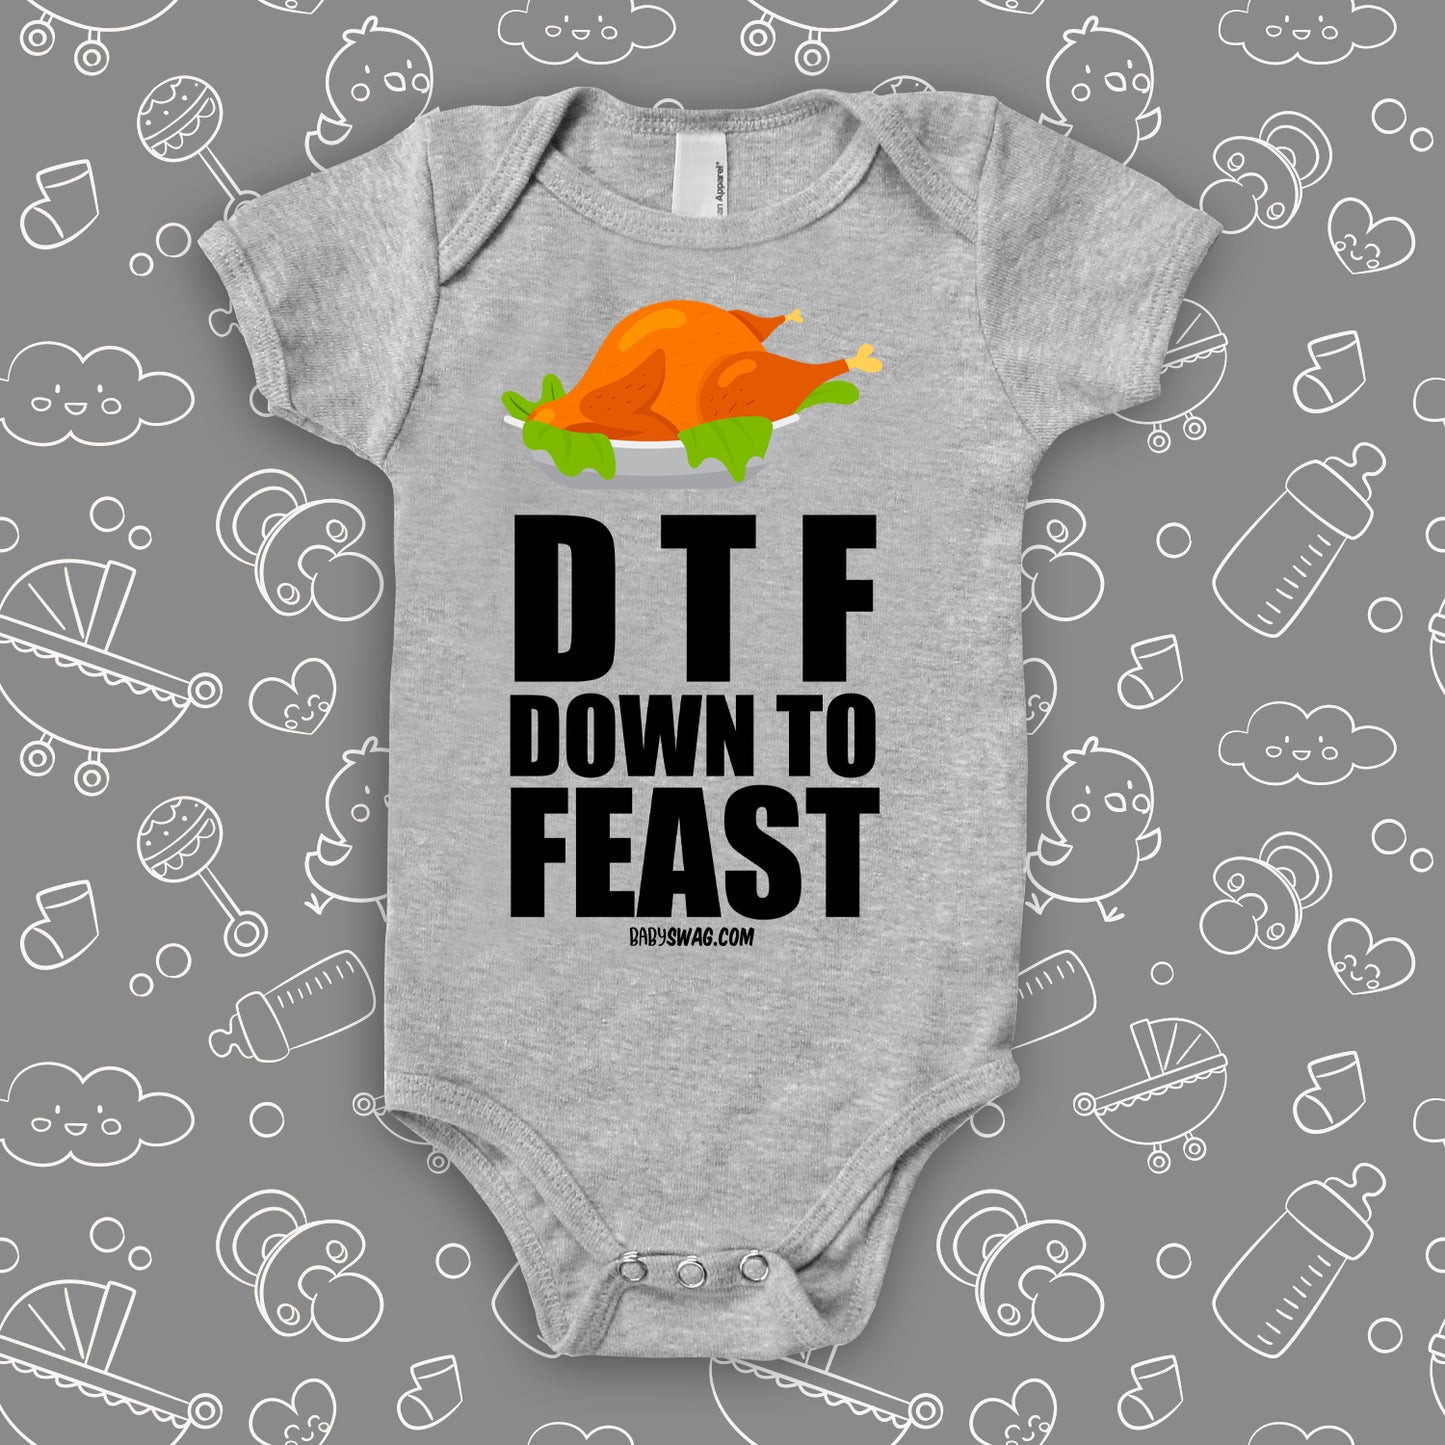 DTF Down To Feast